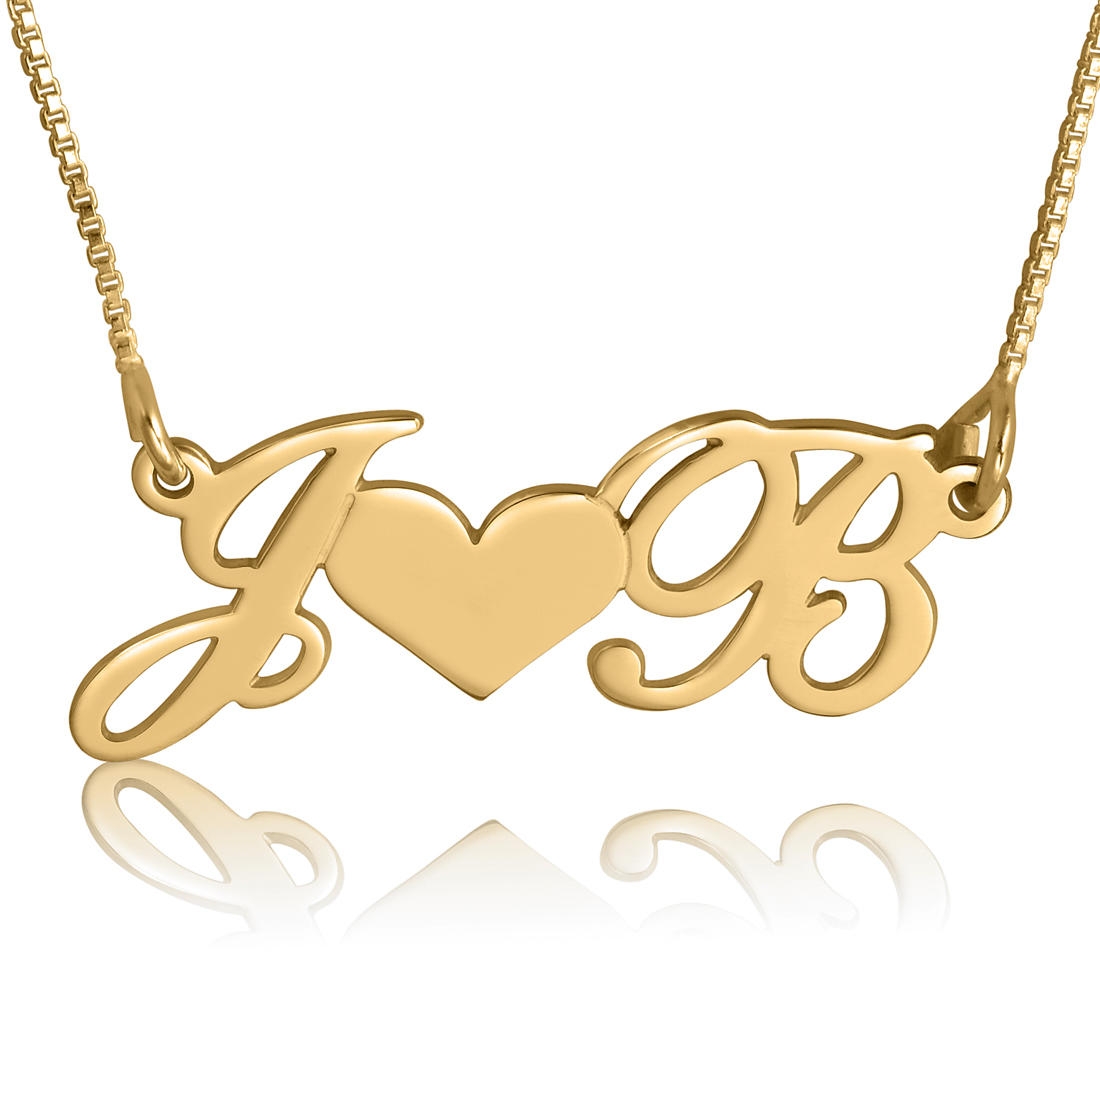 24k Rose Gold Plated Engraved Monogram Three Initials Heart Necklace